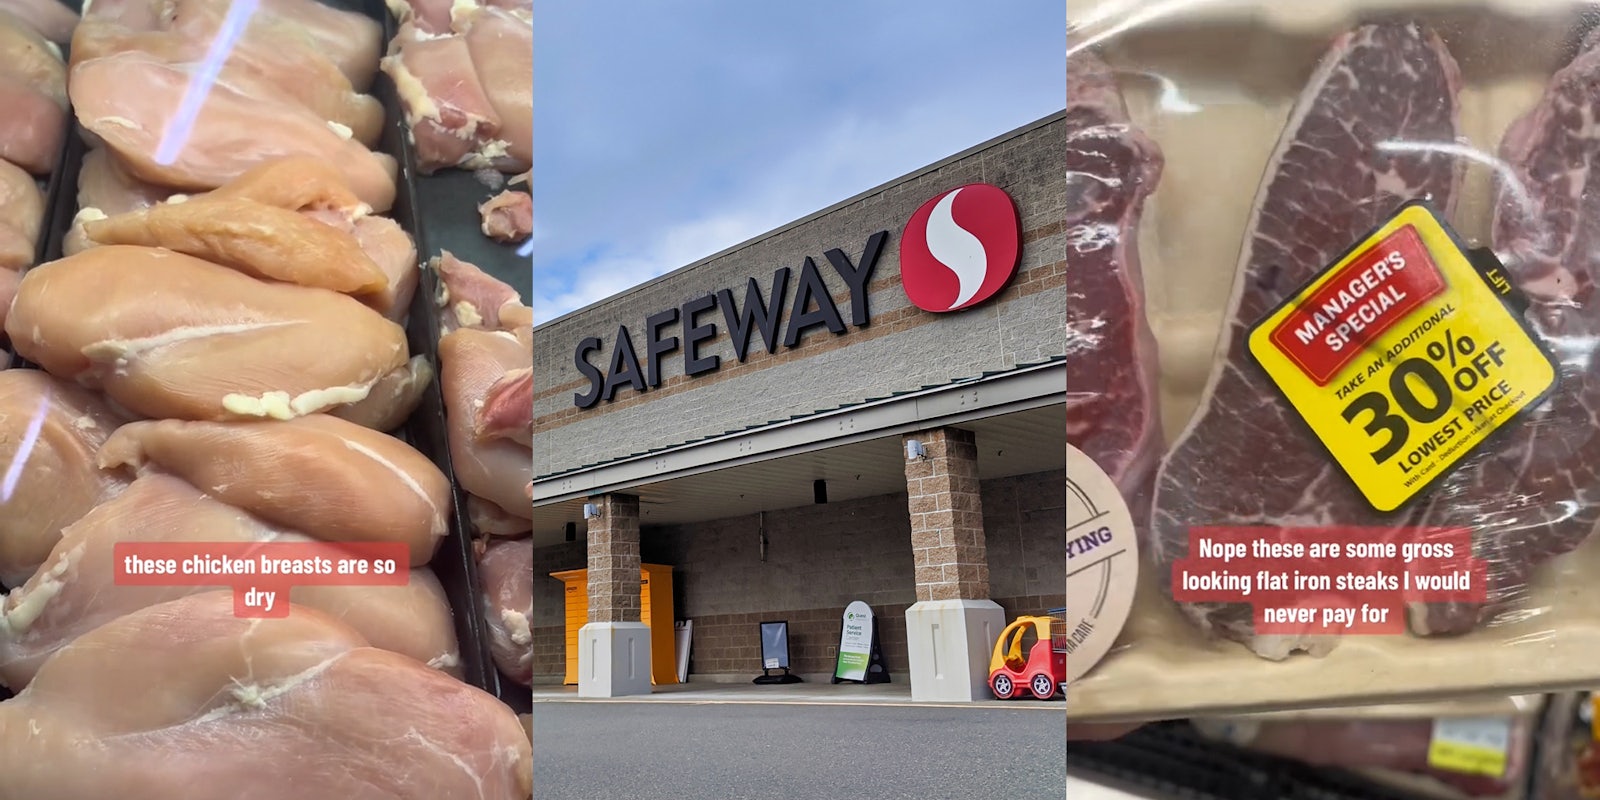 Safeway meat section's chicken with caption 'these chicken breasts are so dry' (l) Safeway building with sign (c) Safeway meat section's steaks with caption 'Nope these are some gross looking flat iron steaks I would never pay for' (r)